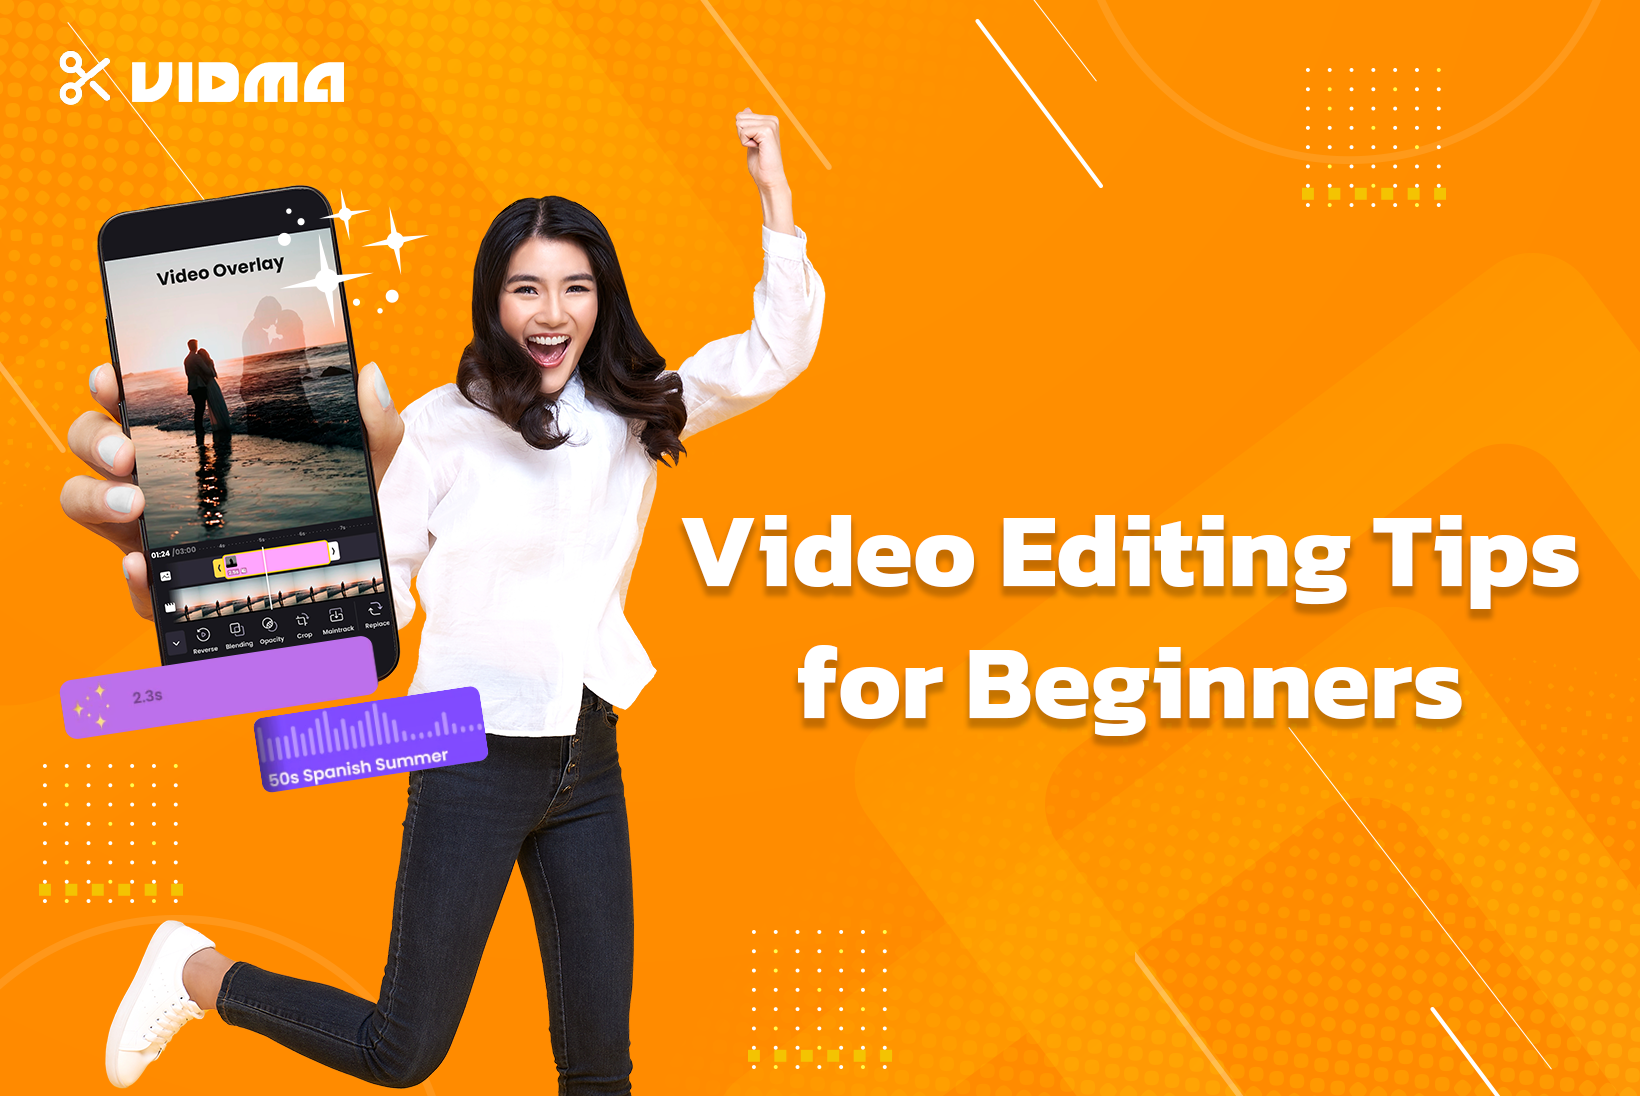 Video Editing Guide for Beginners